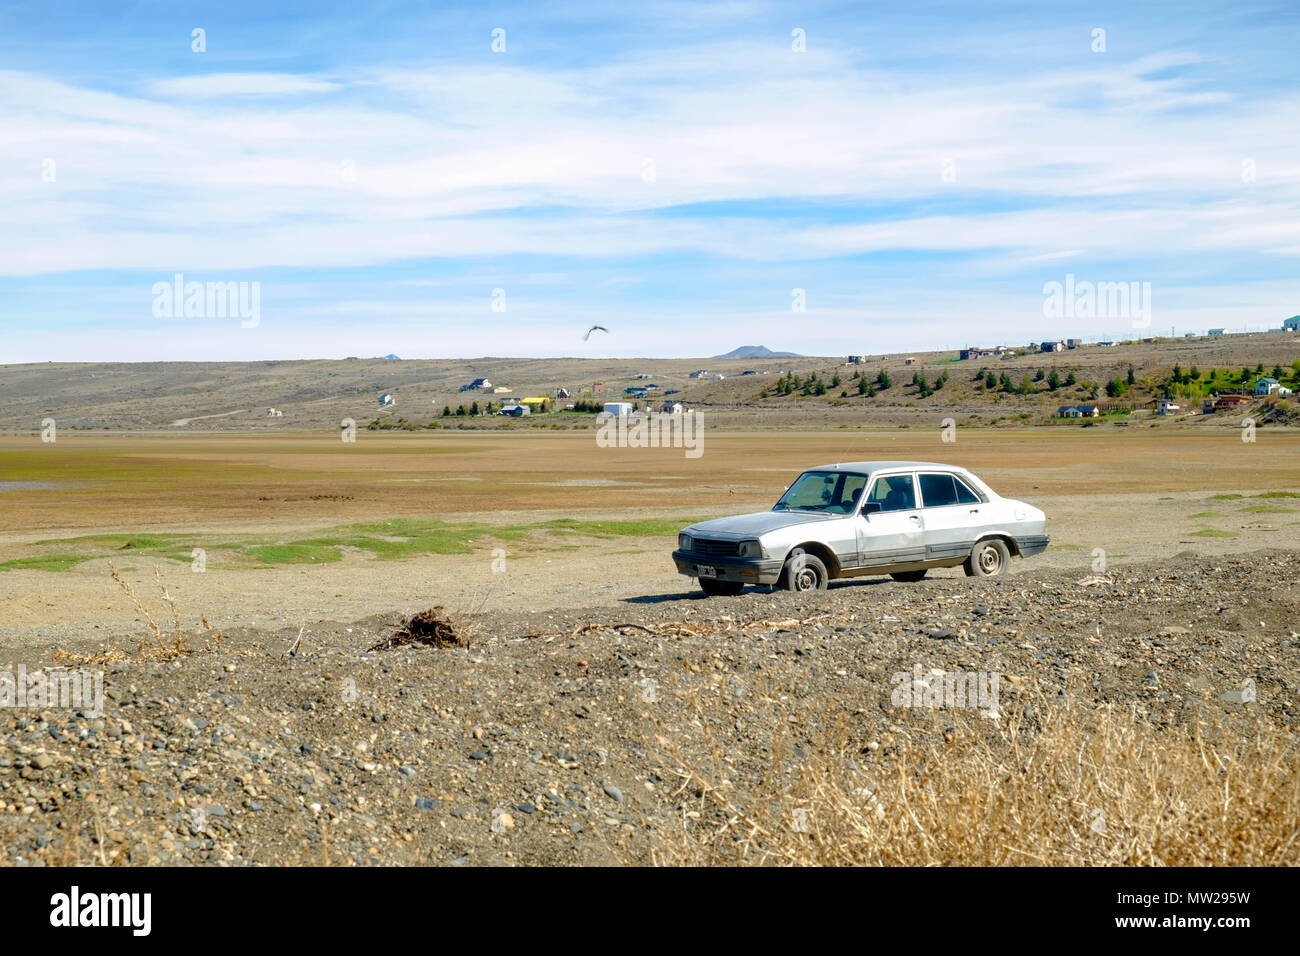 An isolated car is parked in El Calafate. The photo was taken during spring. In summer, Lake Argentino grows and floods this part of the city. Stock Photo